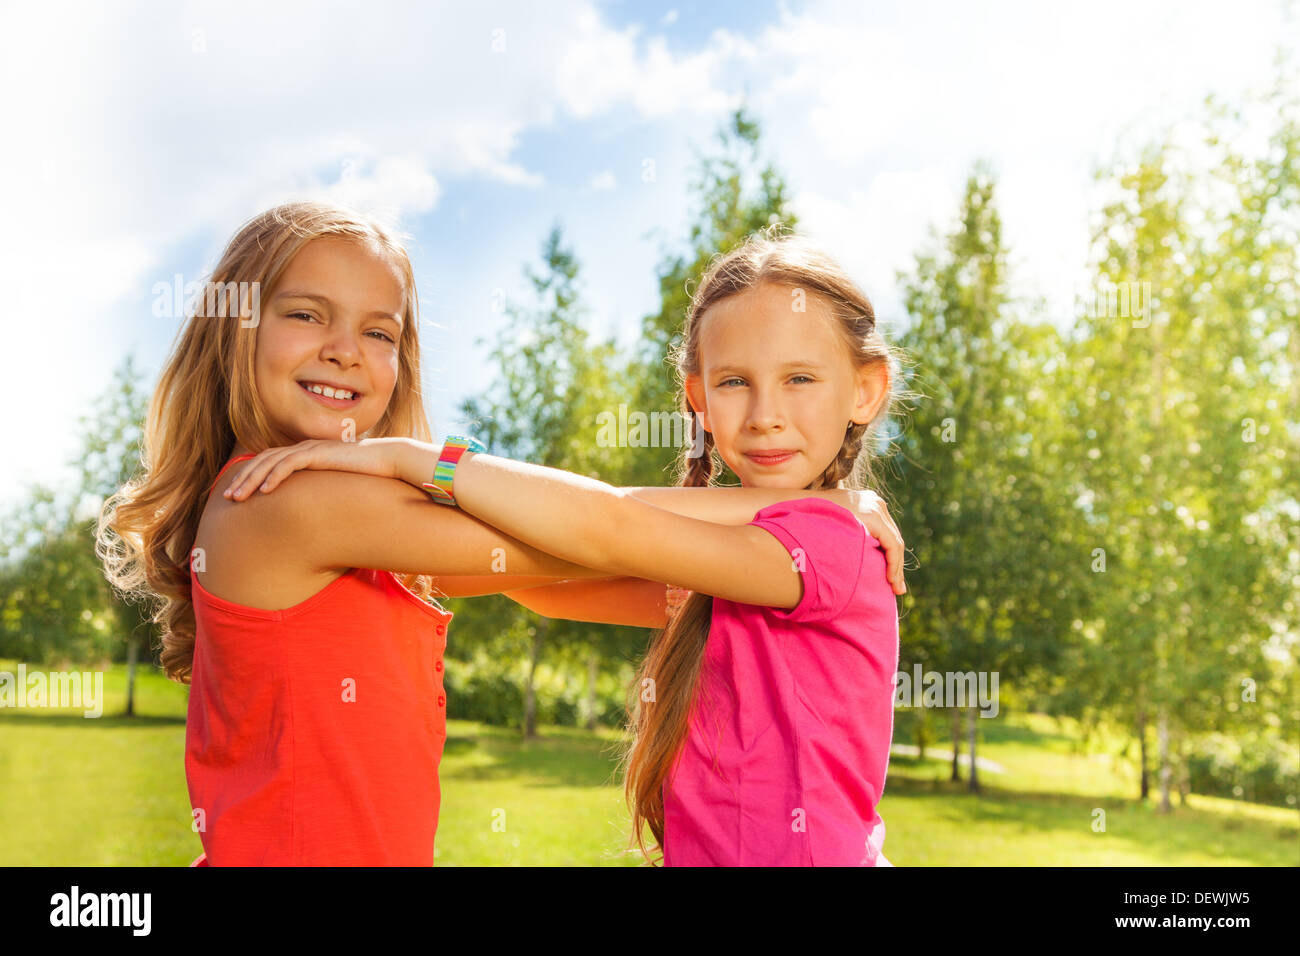 Portrait of two girls bright orange shirts holding hands together and dancing in the park on sunny day Stock Photo